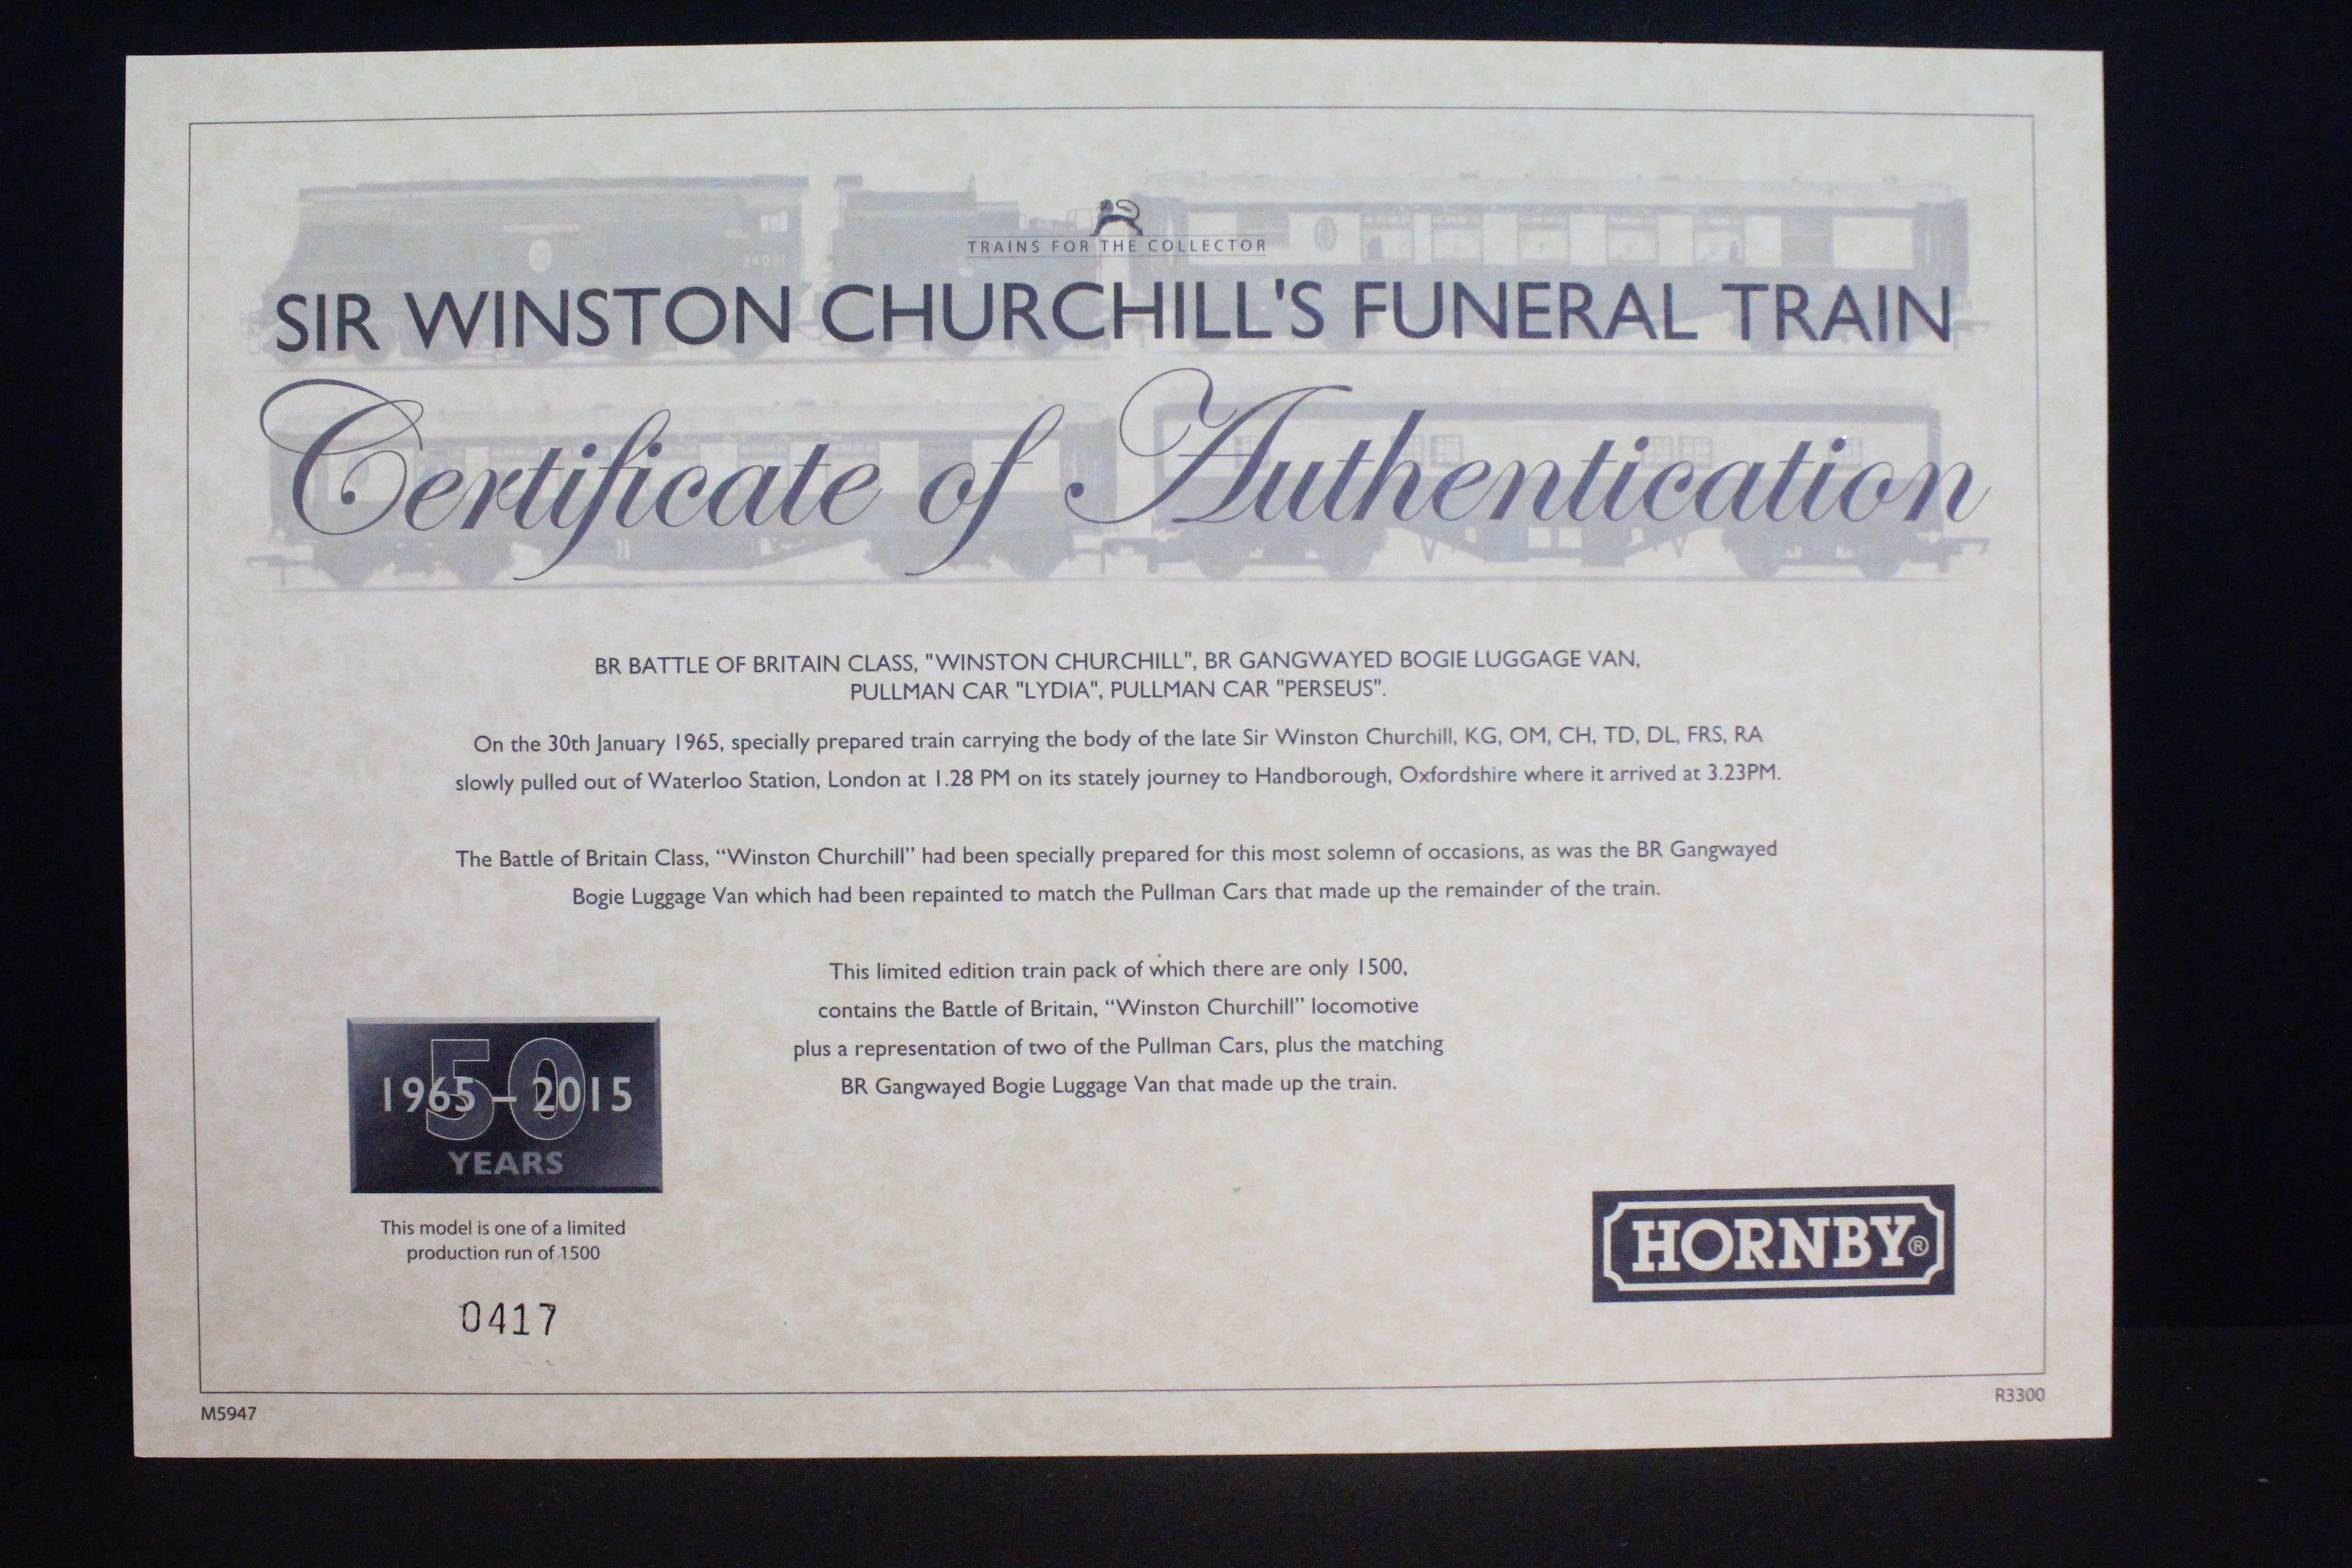 Boxed ltd edn Hornby R3300 Sir Winston Churchill's Funeral Train Pack, completye with certificate - Image 5 of 6